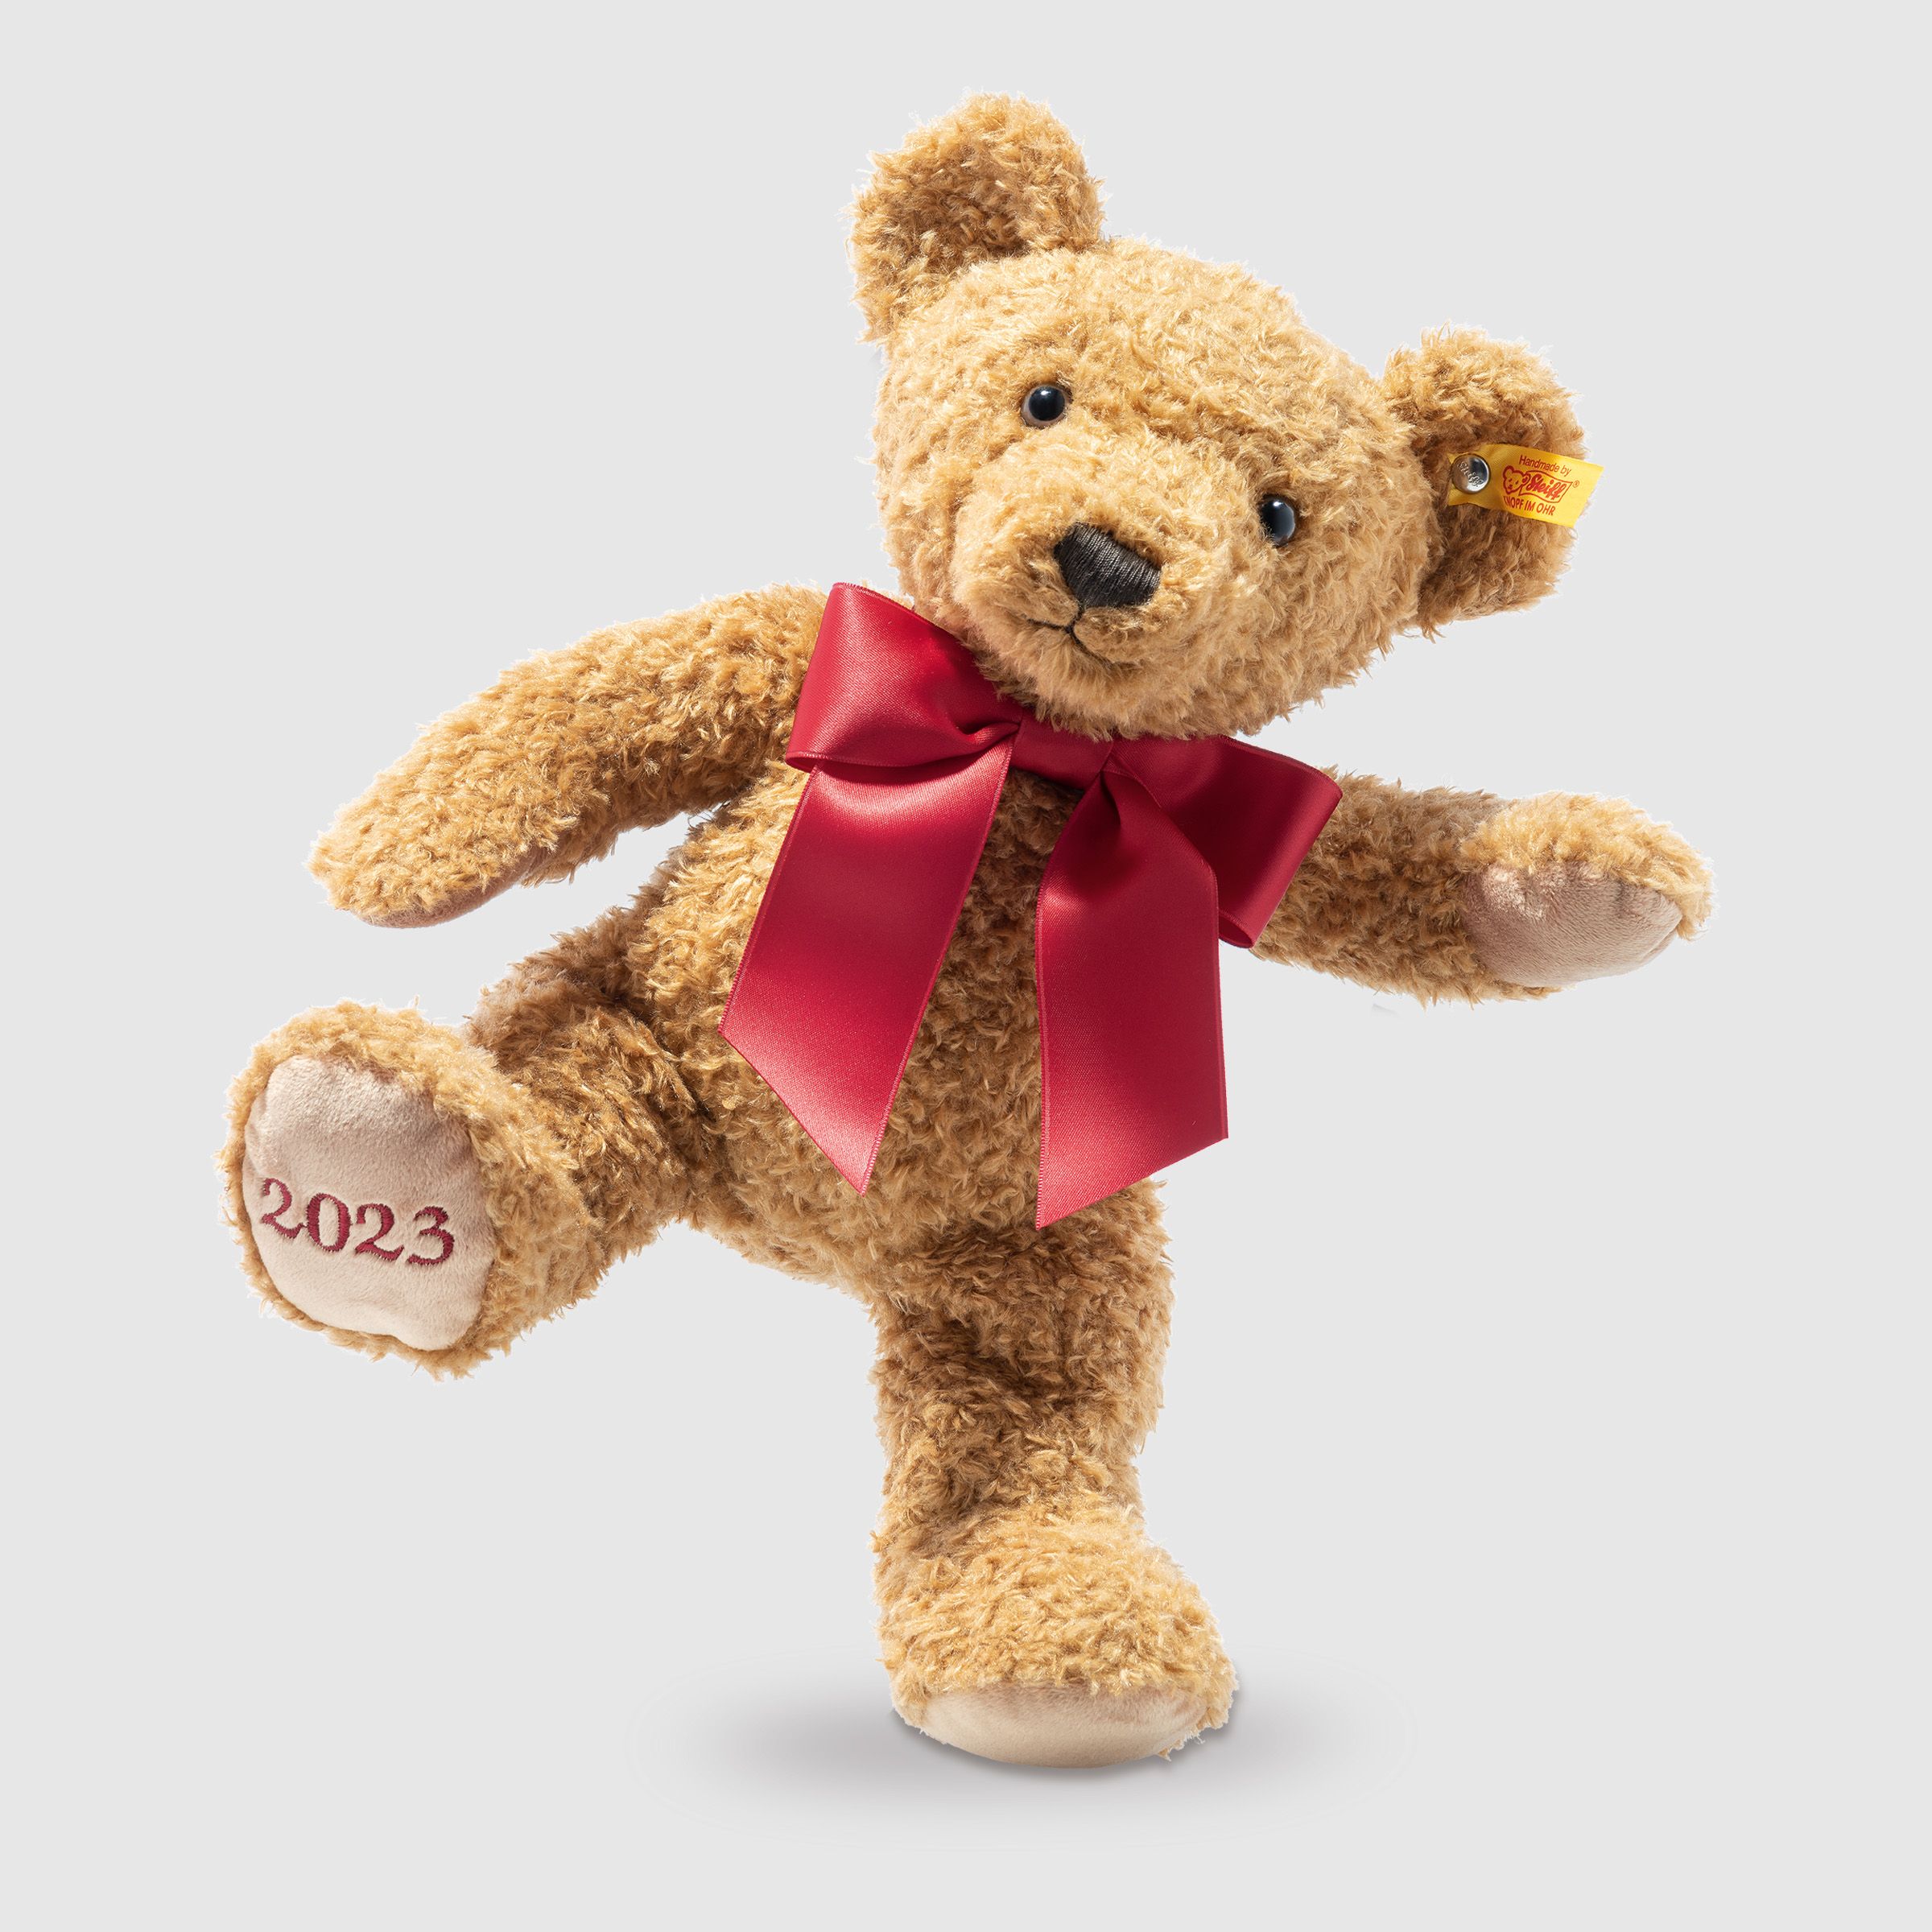 Treat your loved ones to a forever keepsake from Steiff – the inventors of the teddy bear.